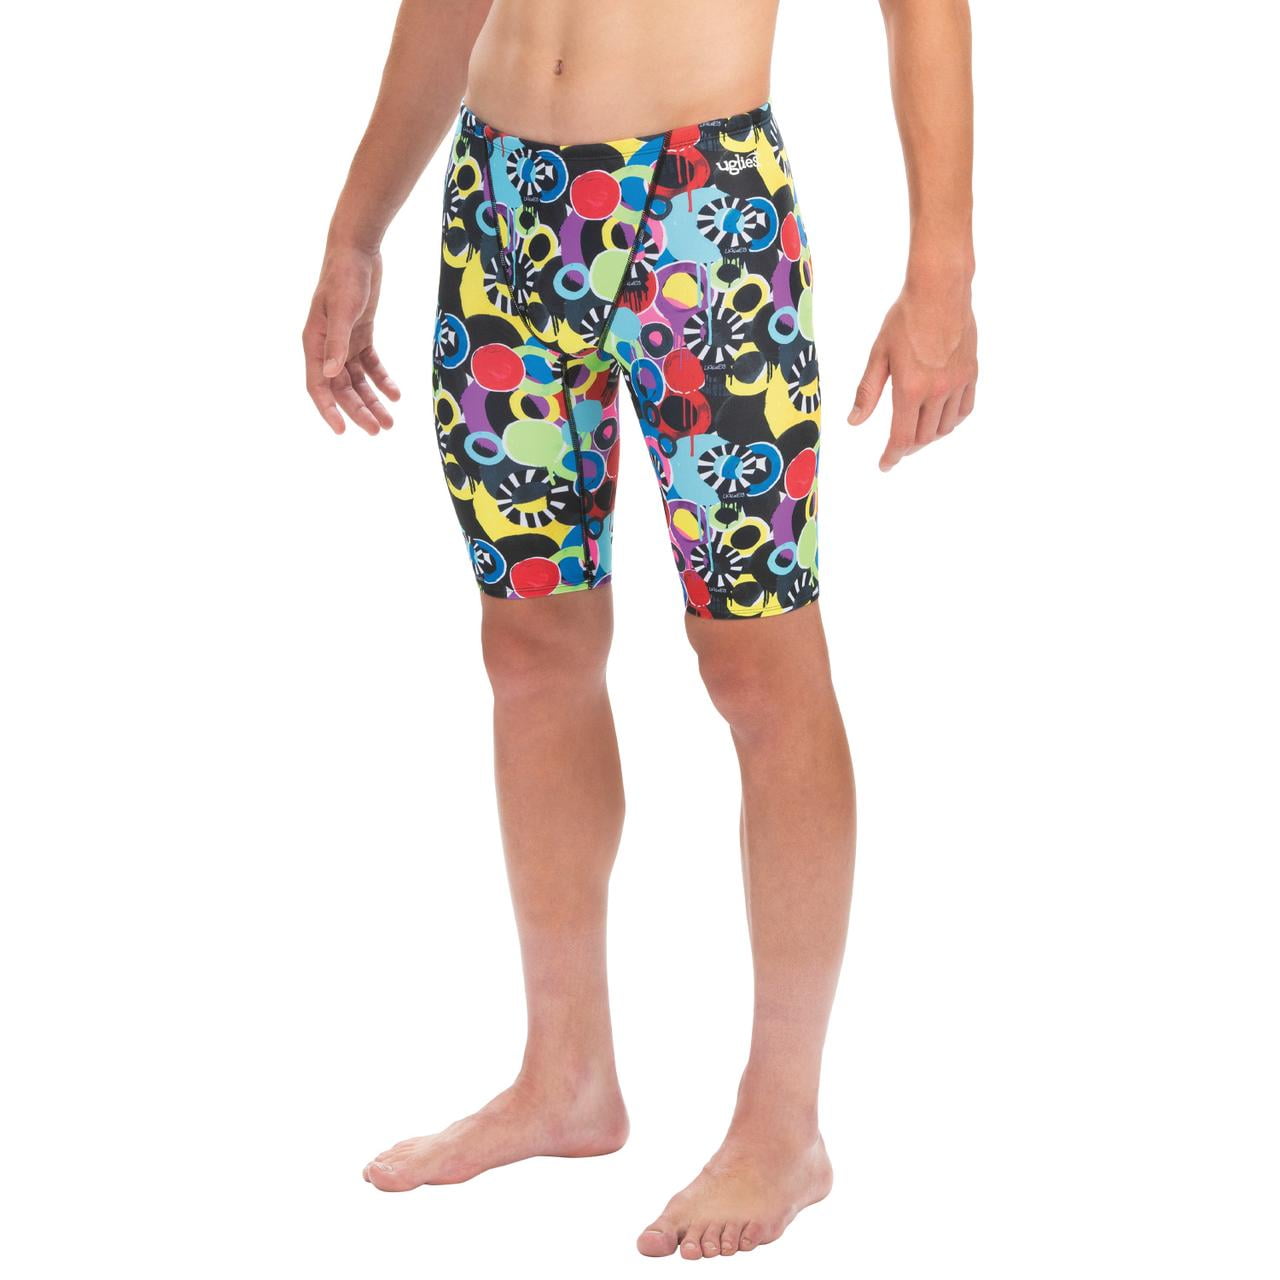 Details about    NEW DOLPHIN UGLIES MENS TRAINING SWIMMING JAMMERS SIZE 34 GRAFITTI F4/1205C 